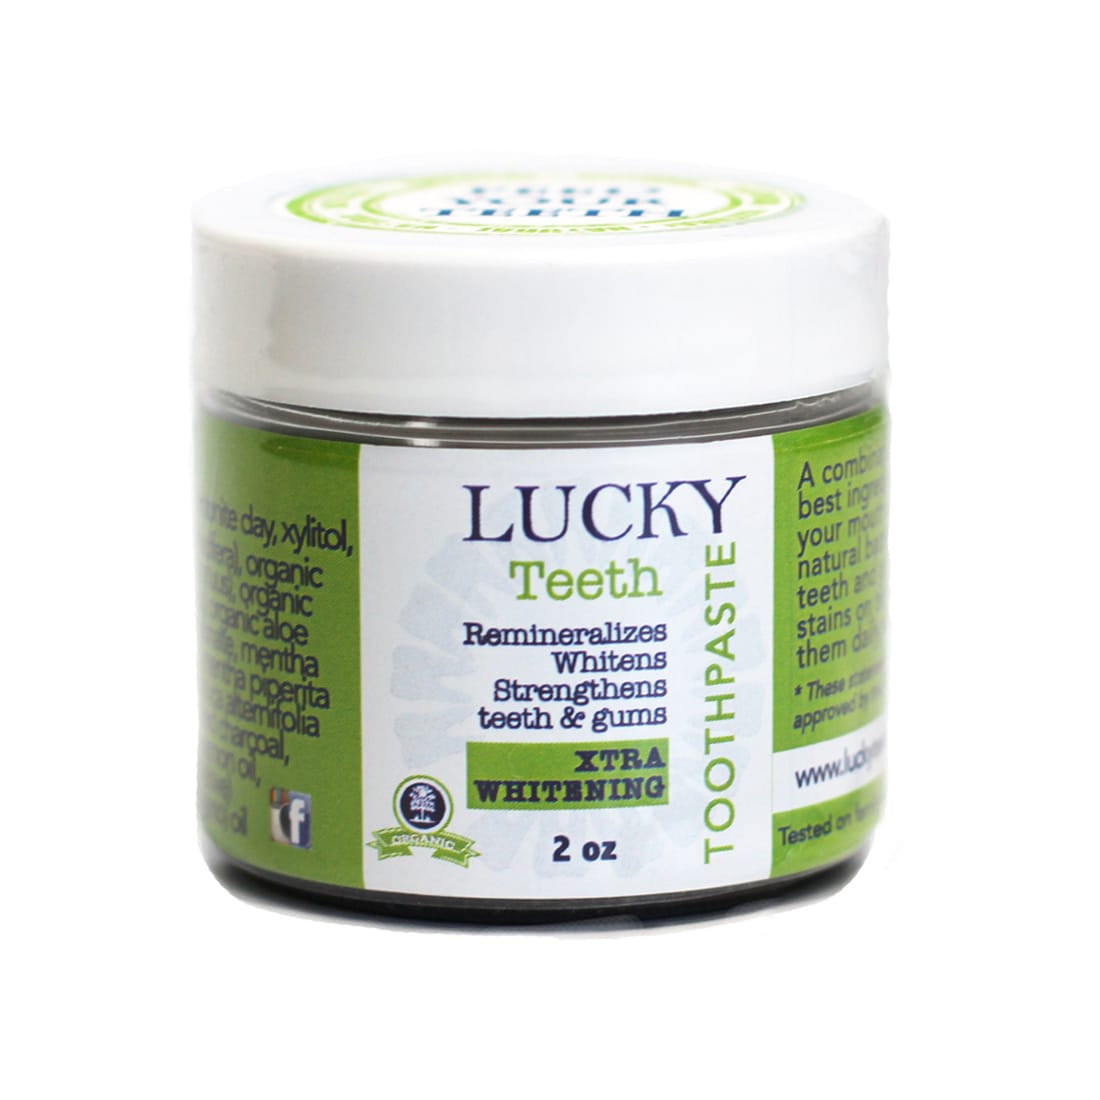 flower-of-life-lucky-teeth-charcoal-whitening-toothpaste-jar-front